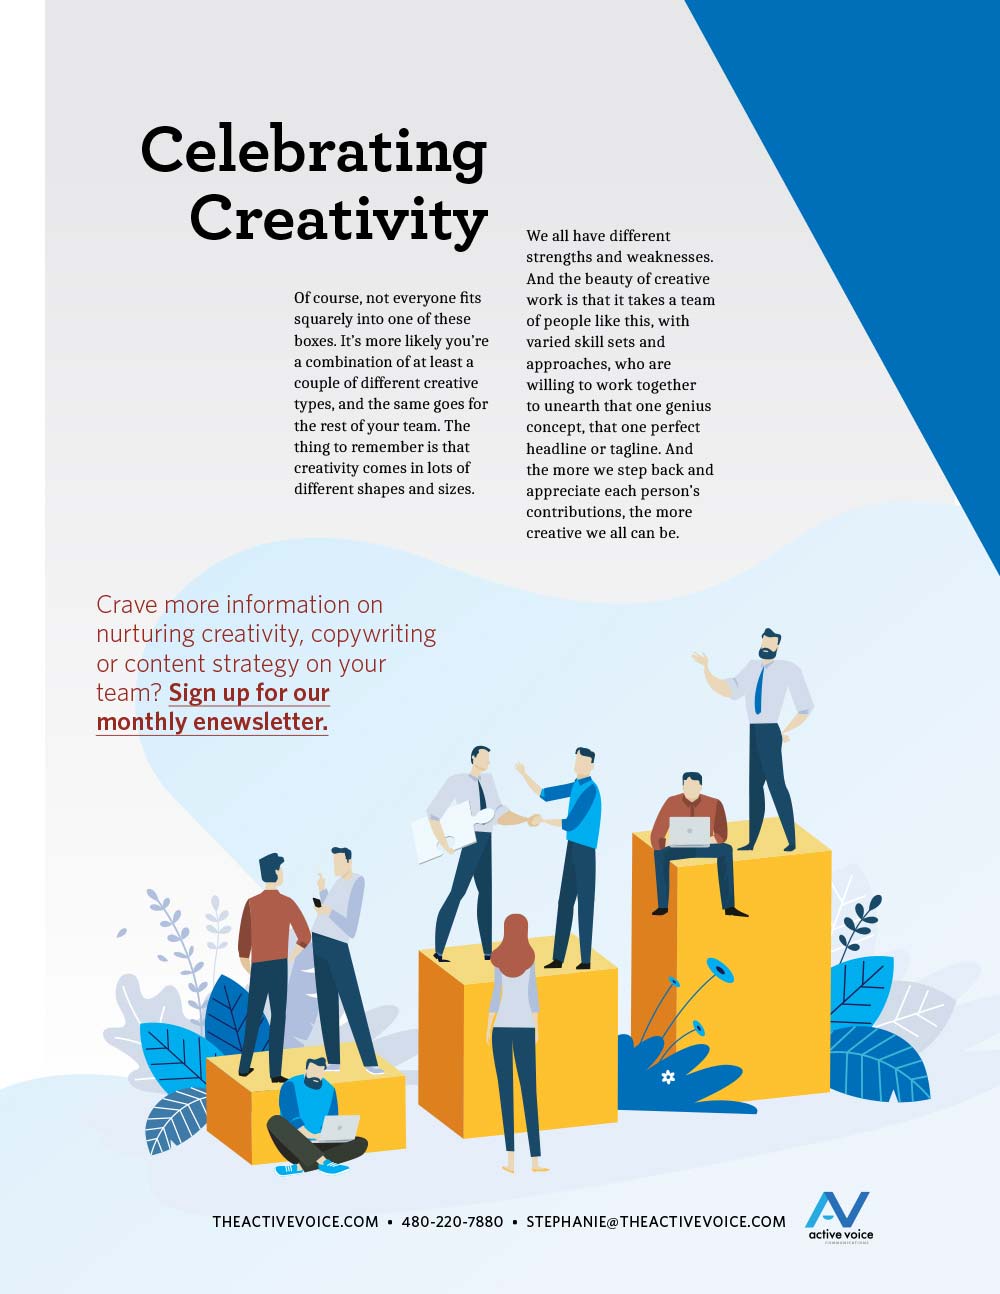 Guide to Cultivating Creativity